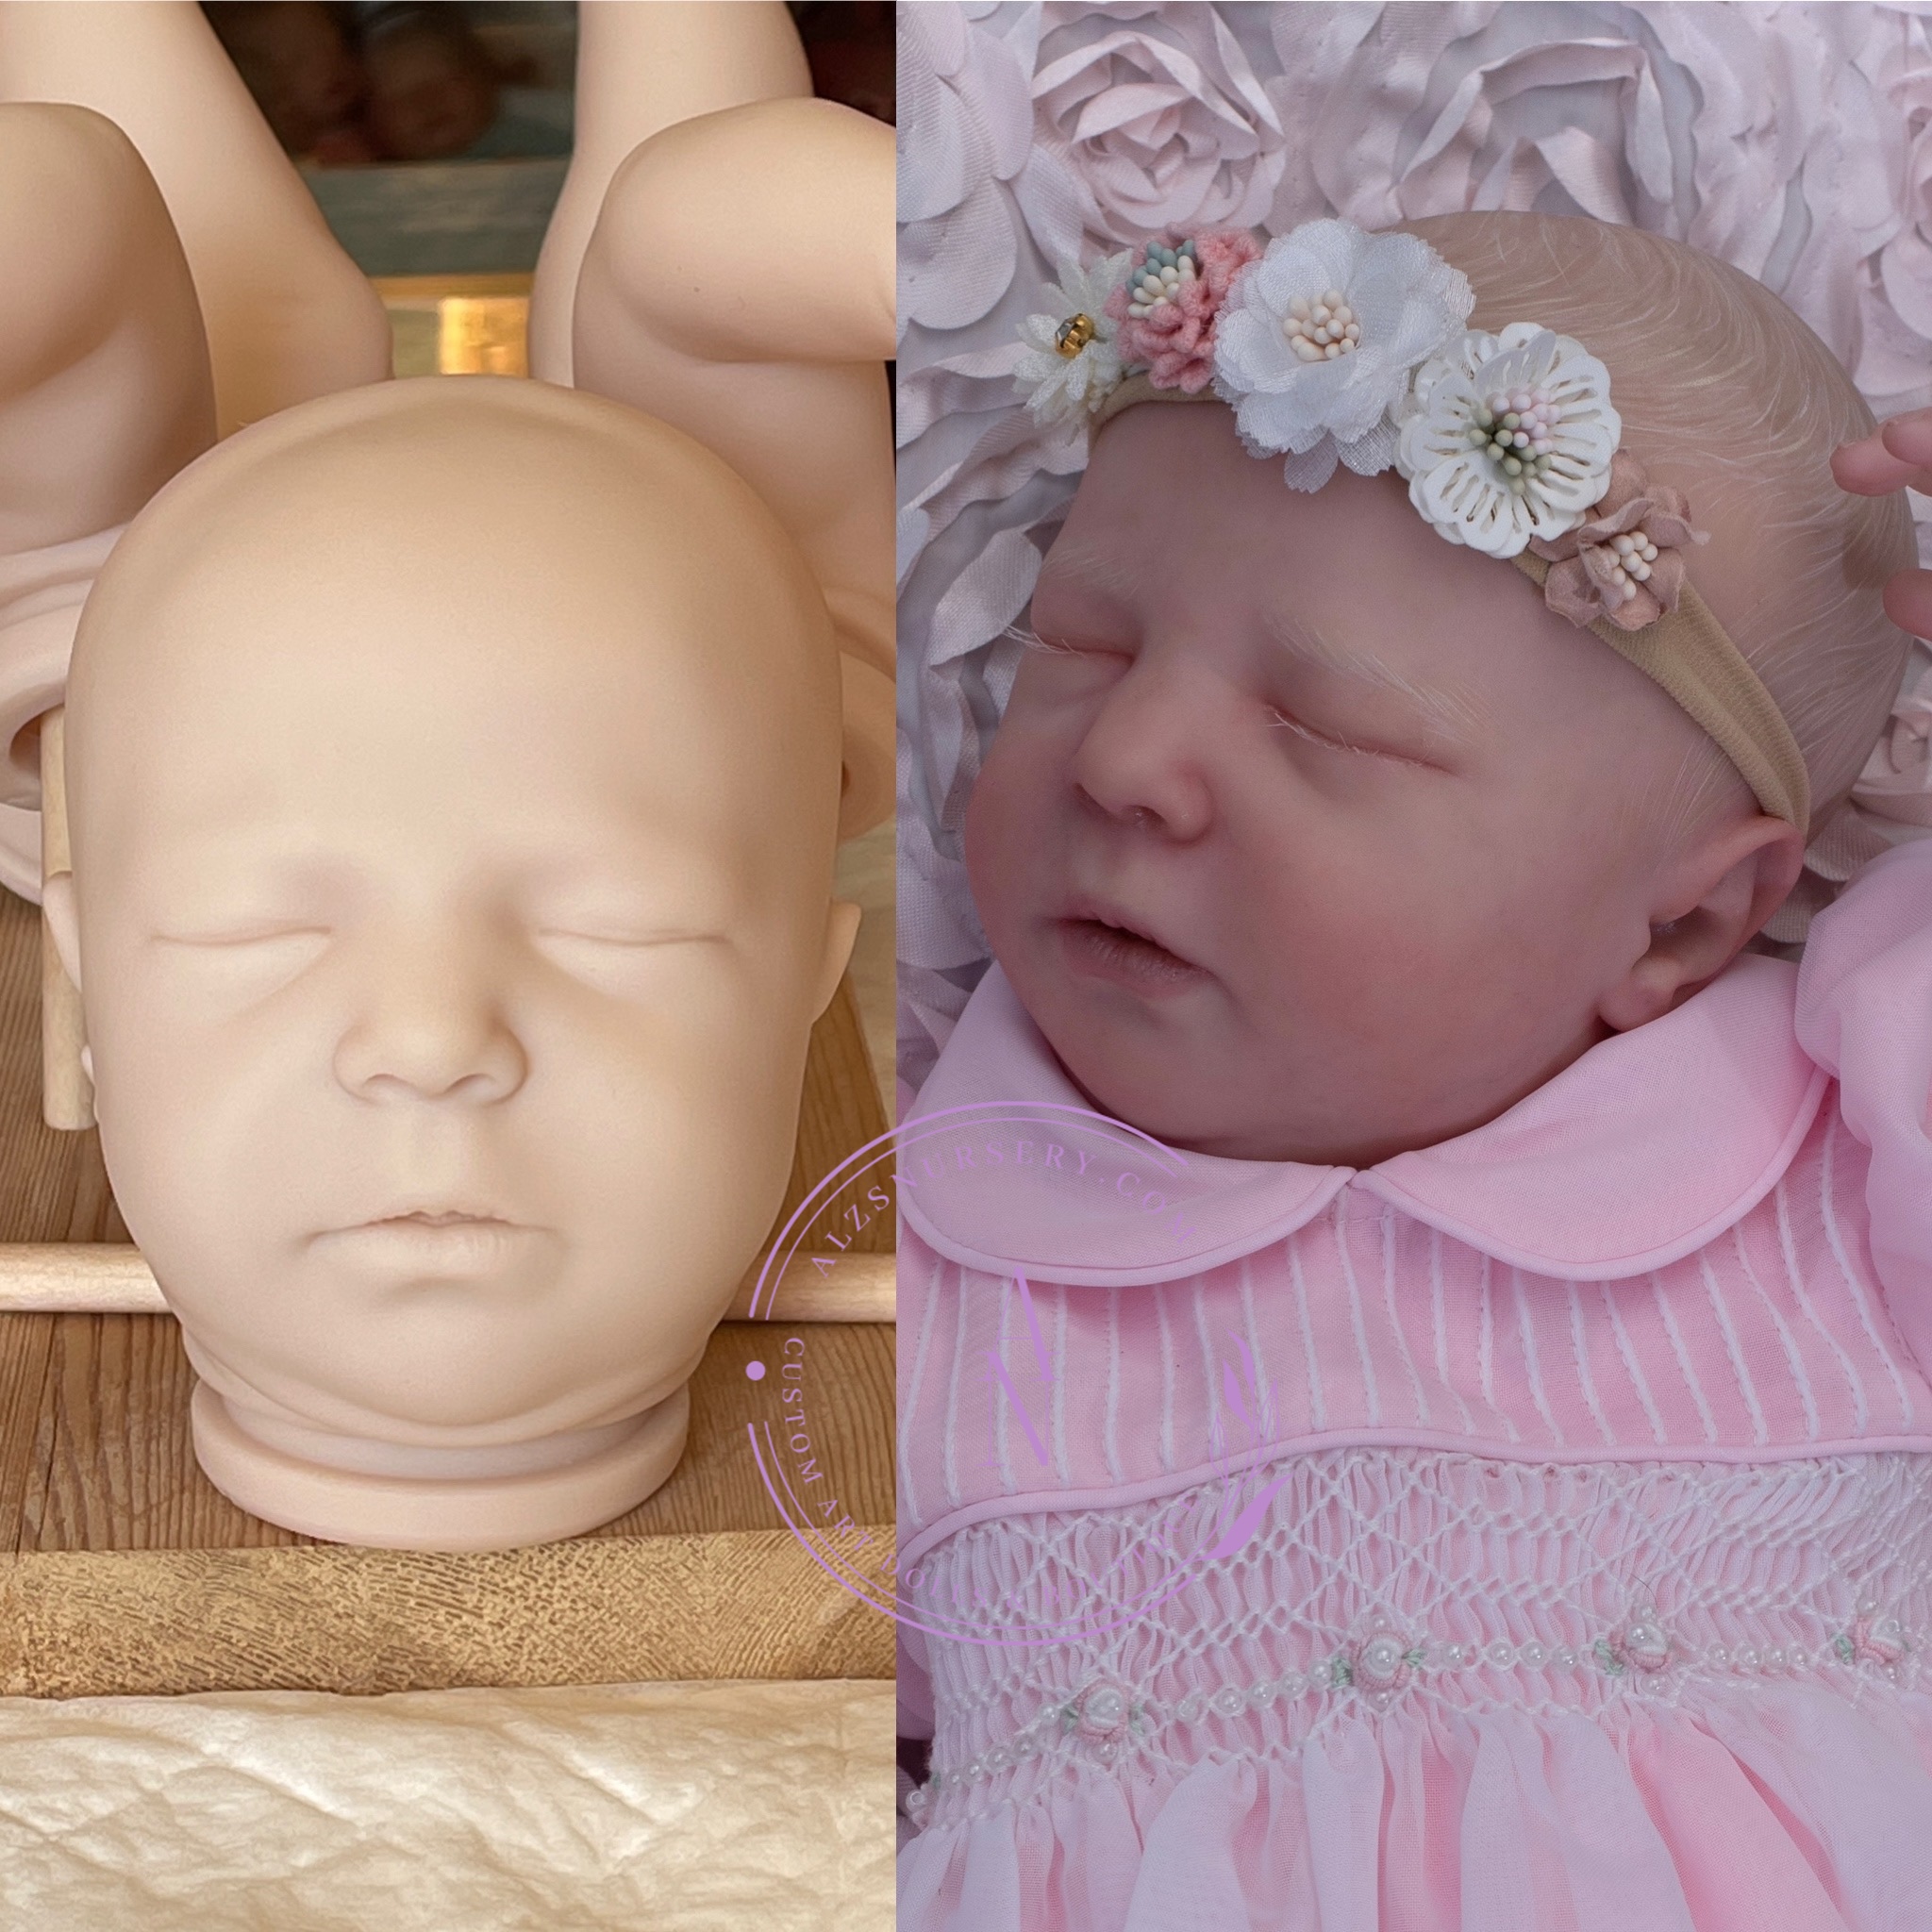 Brittney realborn by BB, brought to life by Ginger Kelly with Alz’s Nursery.